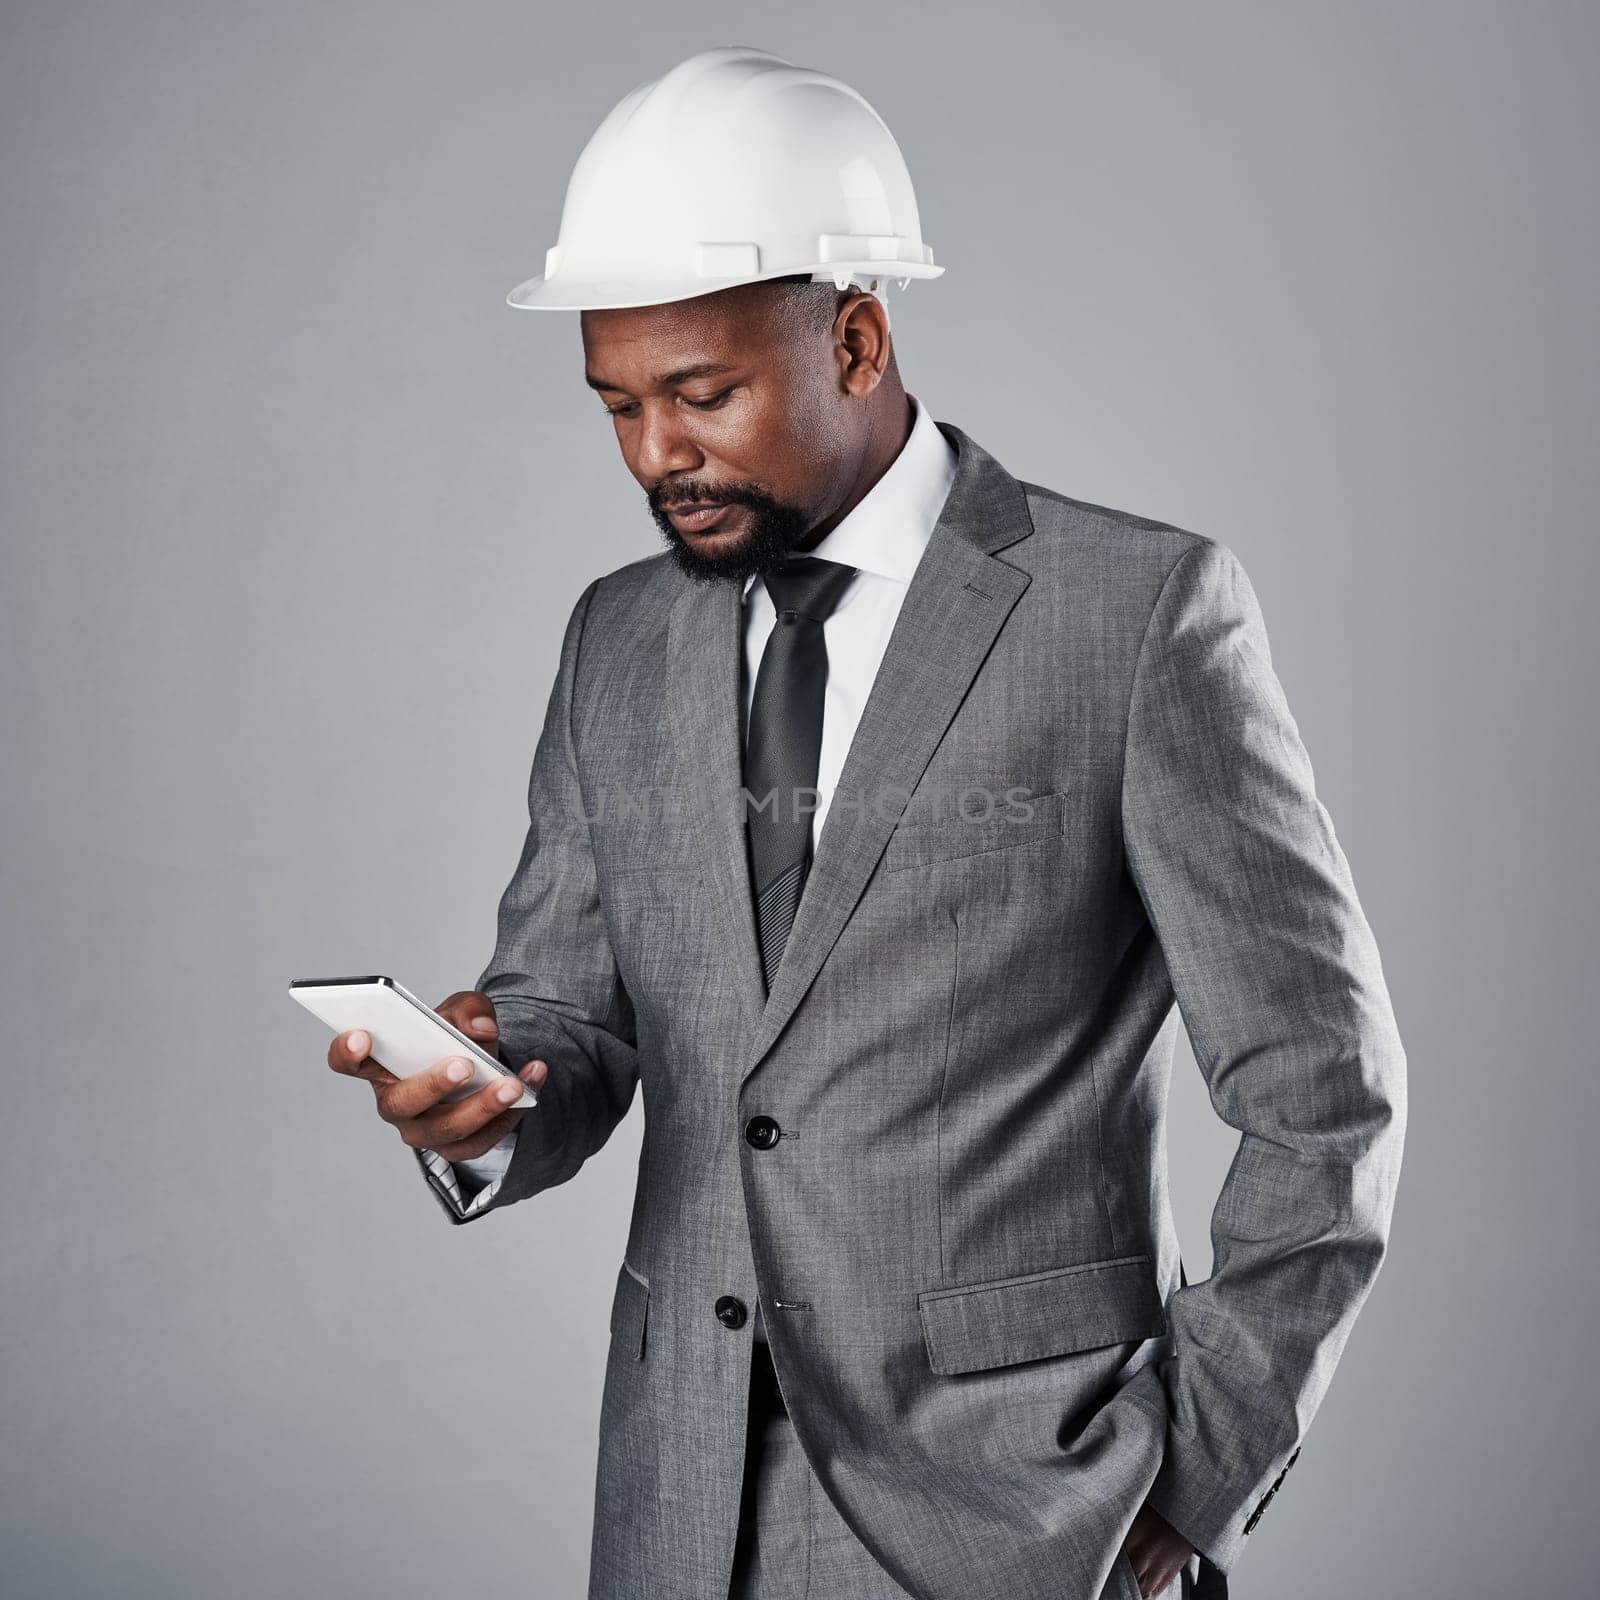 His team can always reach him. a well-dressed civil engineer using his cellphone while standing in the studio